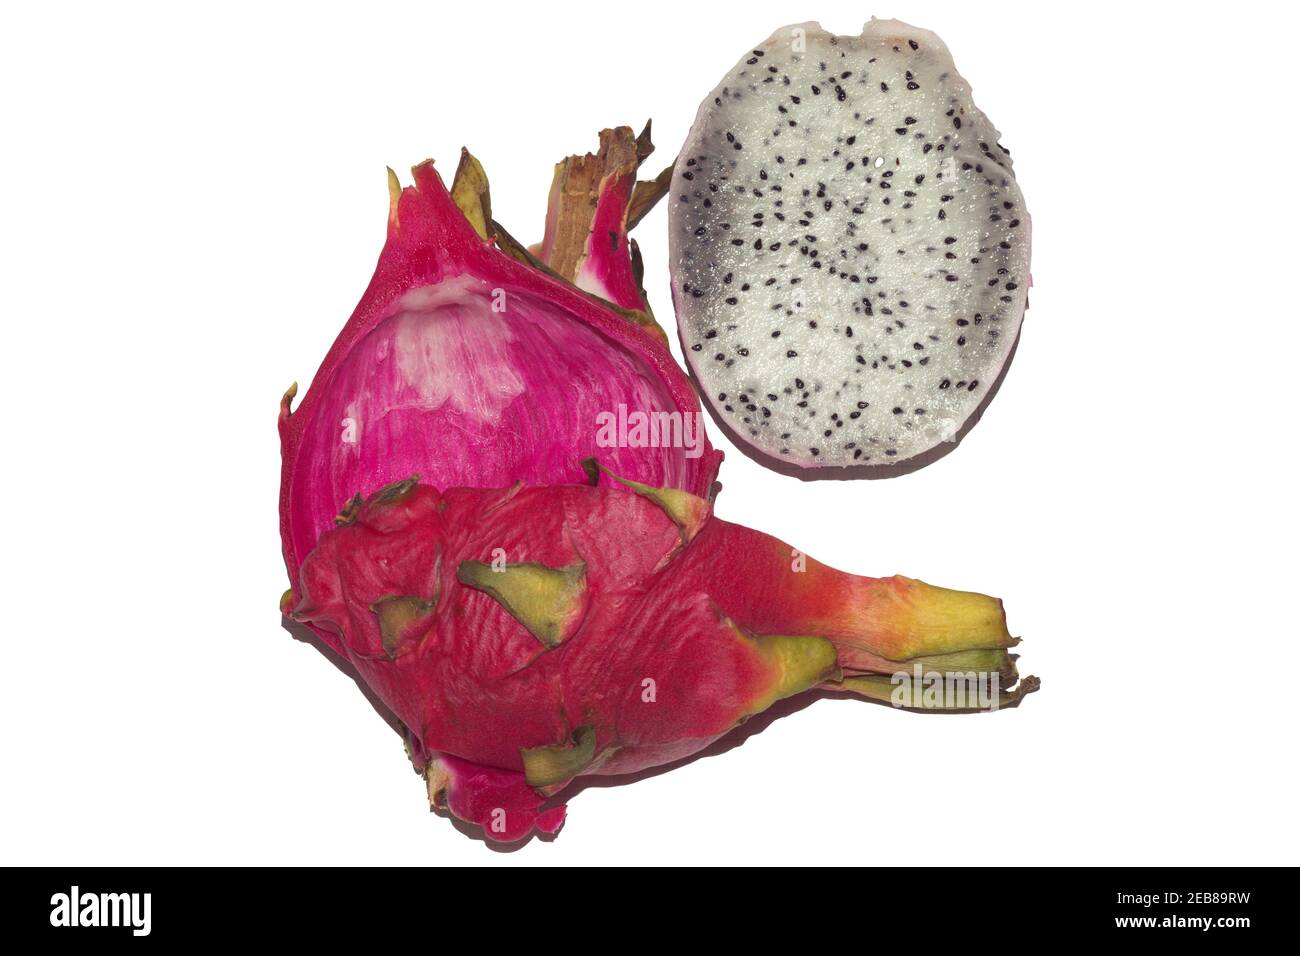 cut in half pitaya. half without scaly skin, a whole quarter of tropical exotic bright pink fruit with white flesh with small black seeds, isolated on Stock Photo